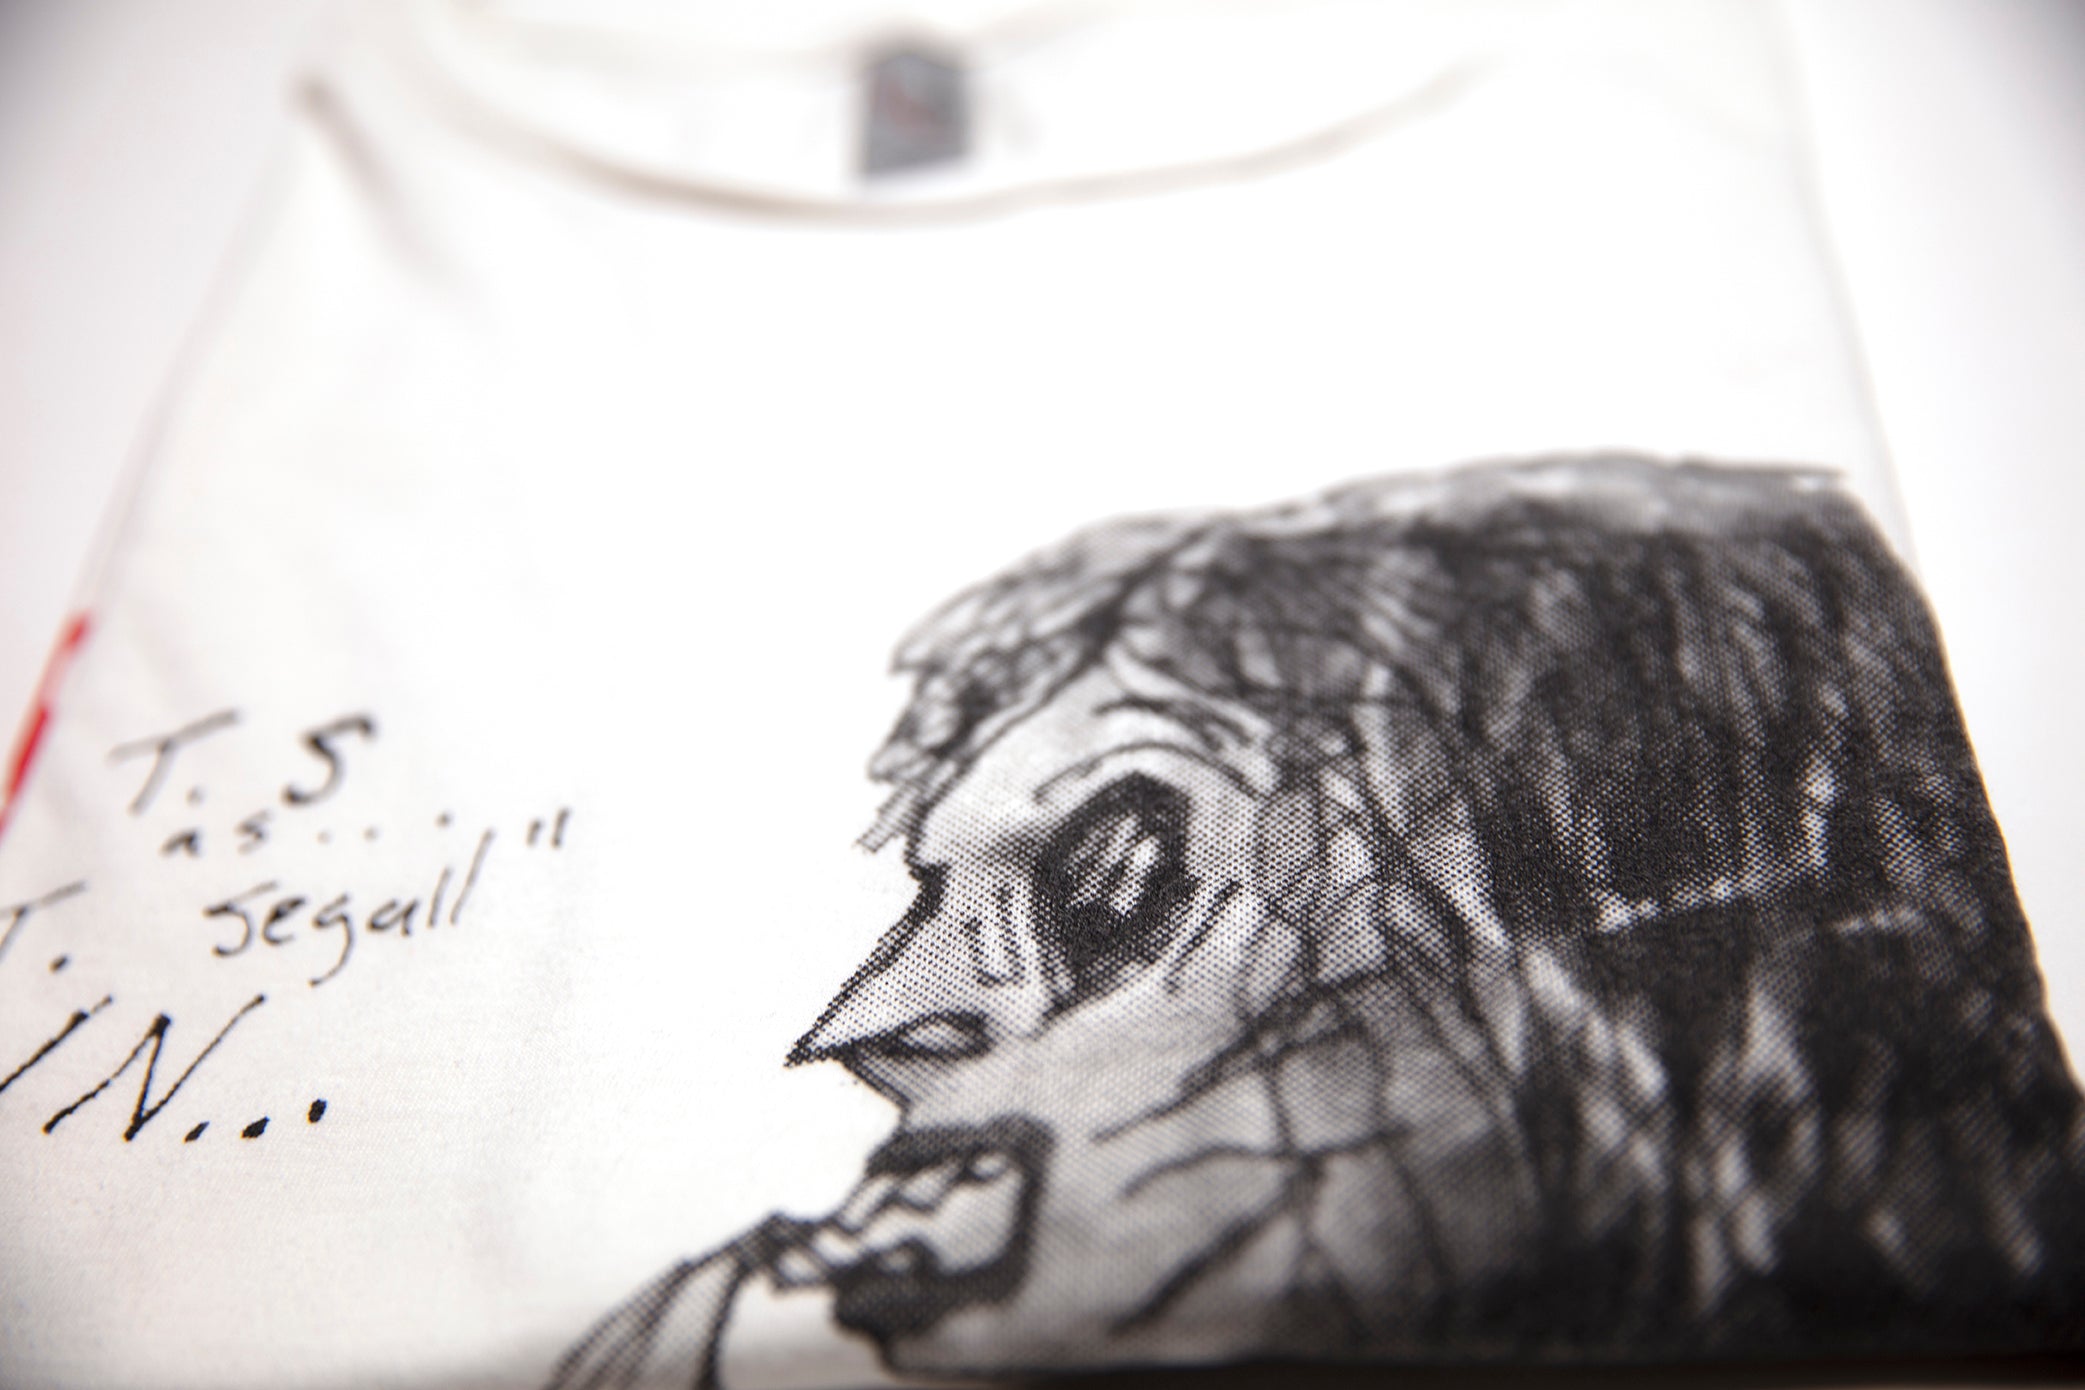 Ty Segall - T.S. As T. Segall In...Tour Shirt Size Large White